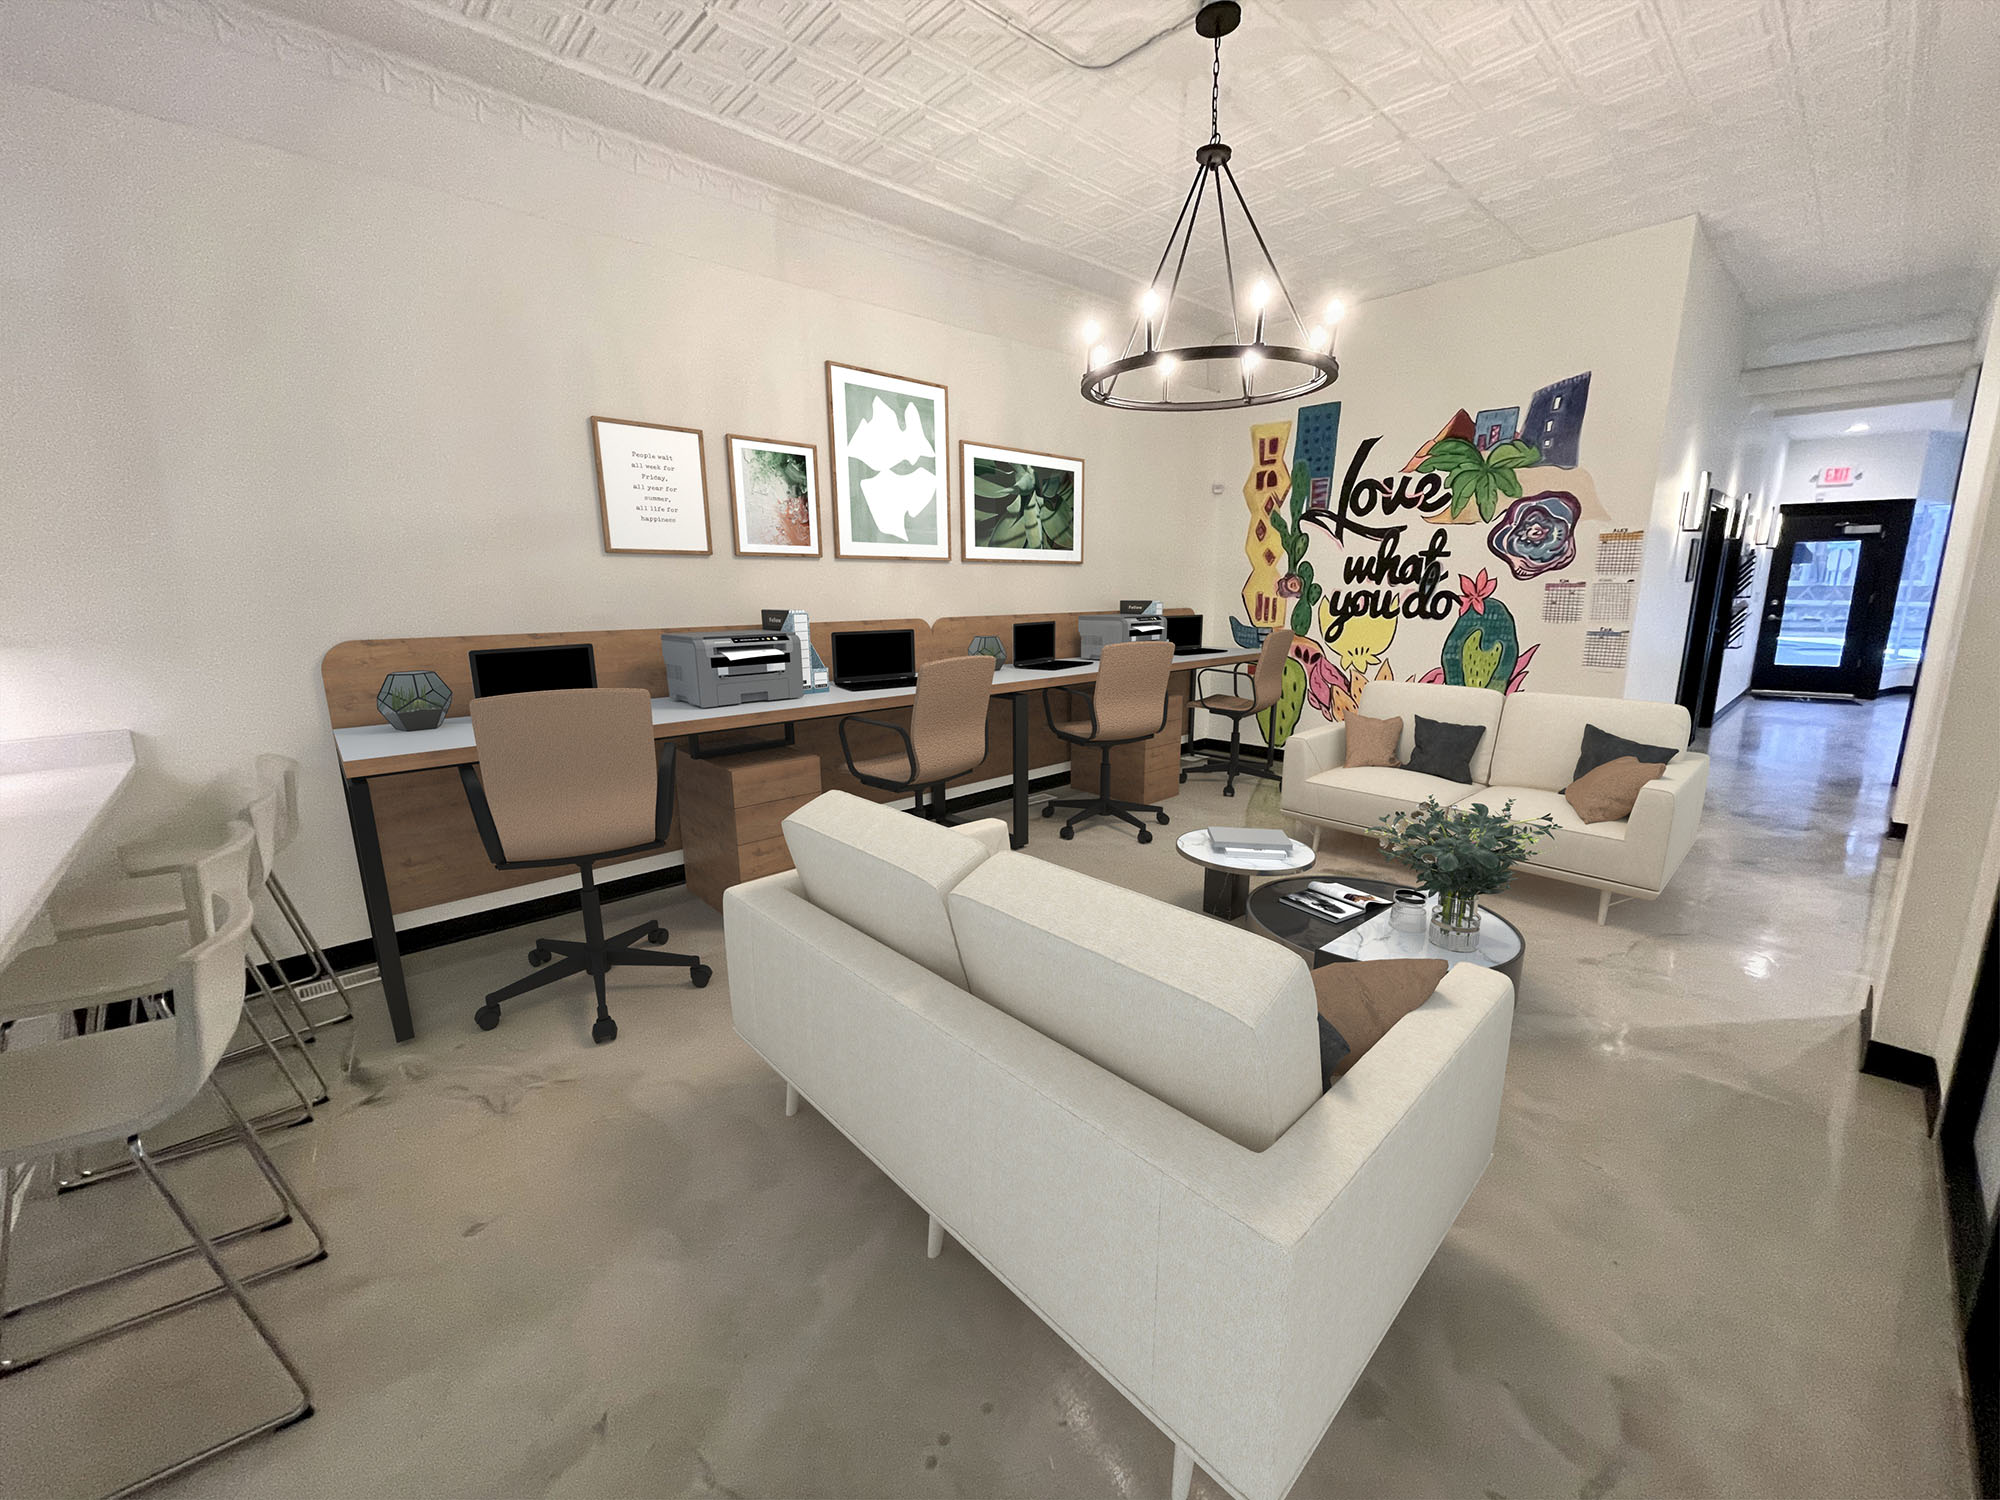 Coworking-office-space-for-lease-in maplewood